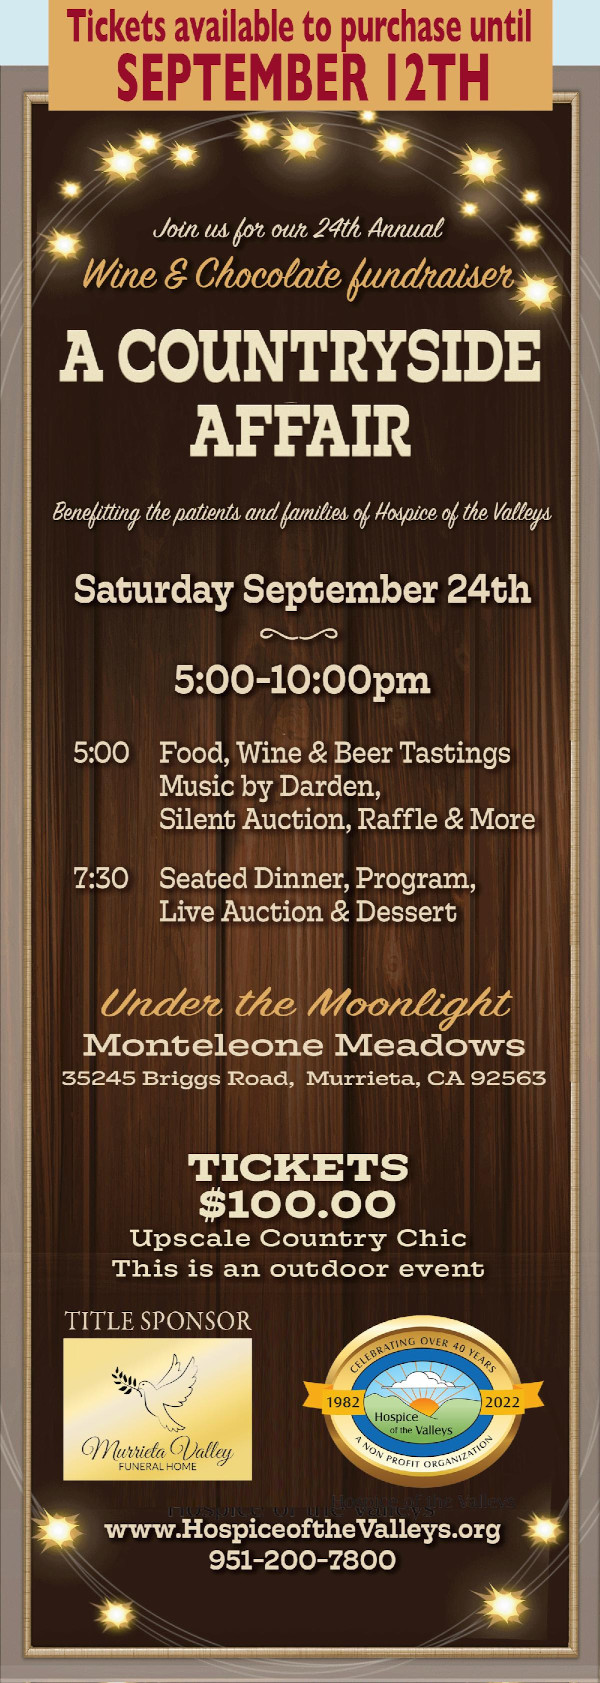 Wine & Chocolate fundraiser - Tickets available until September 12th